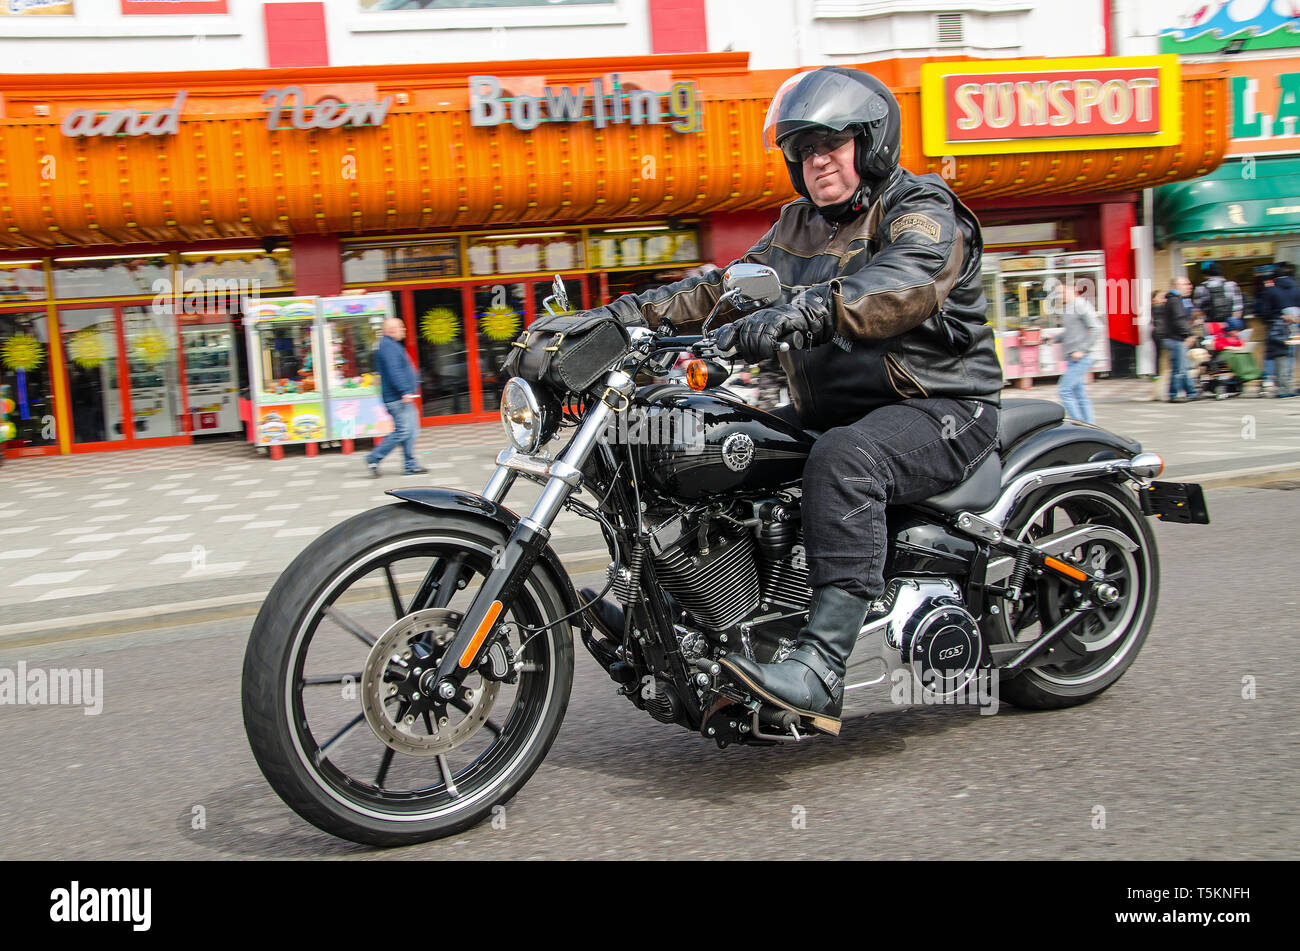 Harley Davidson 103 V twin motorbike ridden at the Southend Shakedown 2015 motorcycle rally, Southend on Sea, Essex, UK Stock Photo